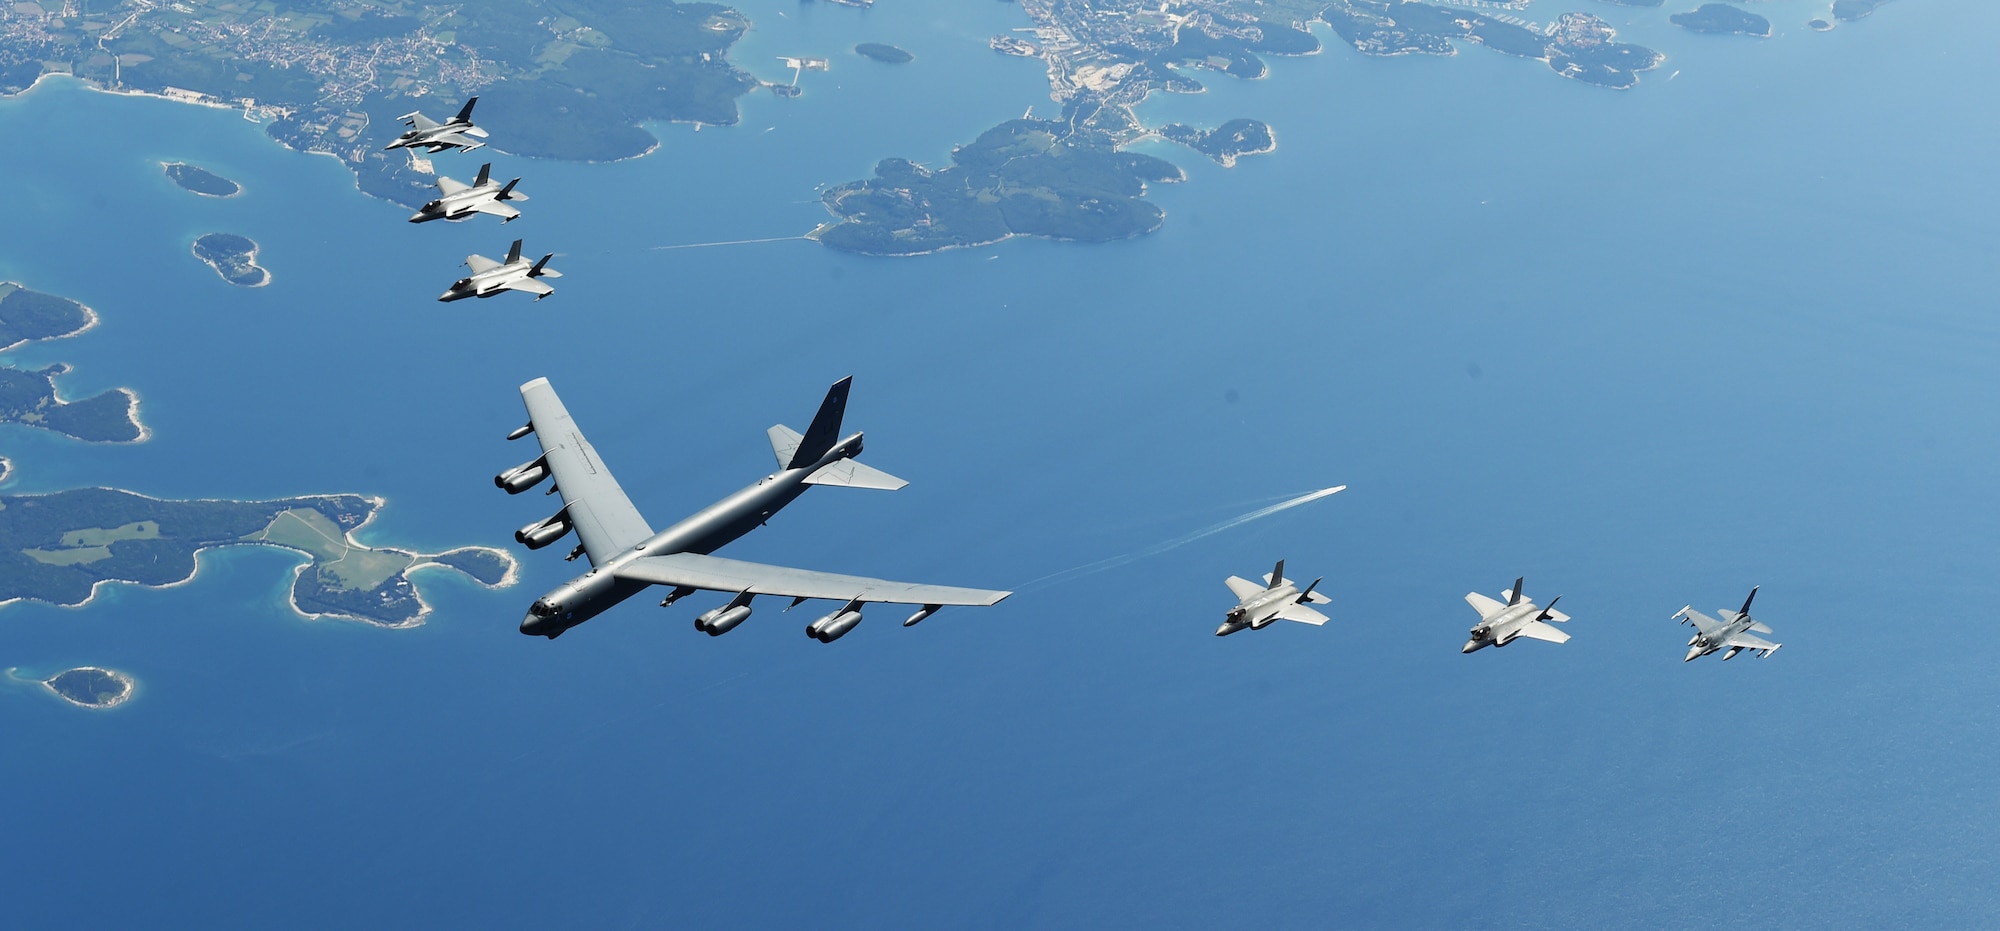 U.S. and Italian Air Force aircraft consisting of F-35 Lightning IIs, F-16 Fighting Falcons and a B-52 Stratofortress, fly in formation over the Adriatic Sea during exercise Astral Knight 19, June 4, 2019. Astral Knight takes place throughout various locations in Europe, involving more than 900 Airmen and supports the collective defense and security of NATO allies and U.S. forces in Europe. (U.S. Air Force photo by Staff Sgt. Joshua R. M. Dewberry)